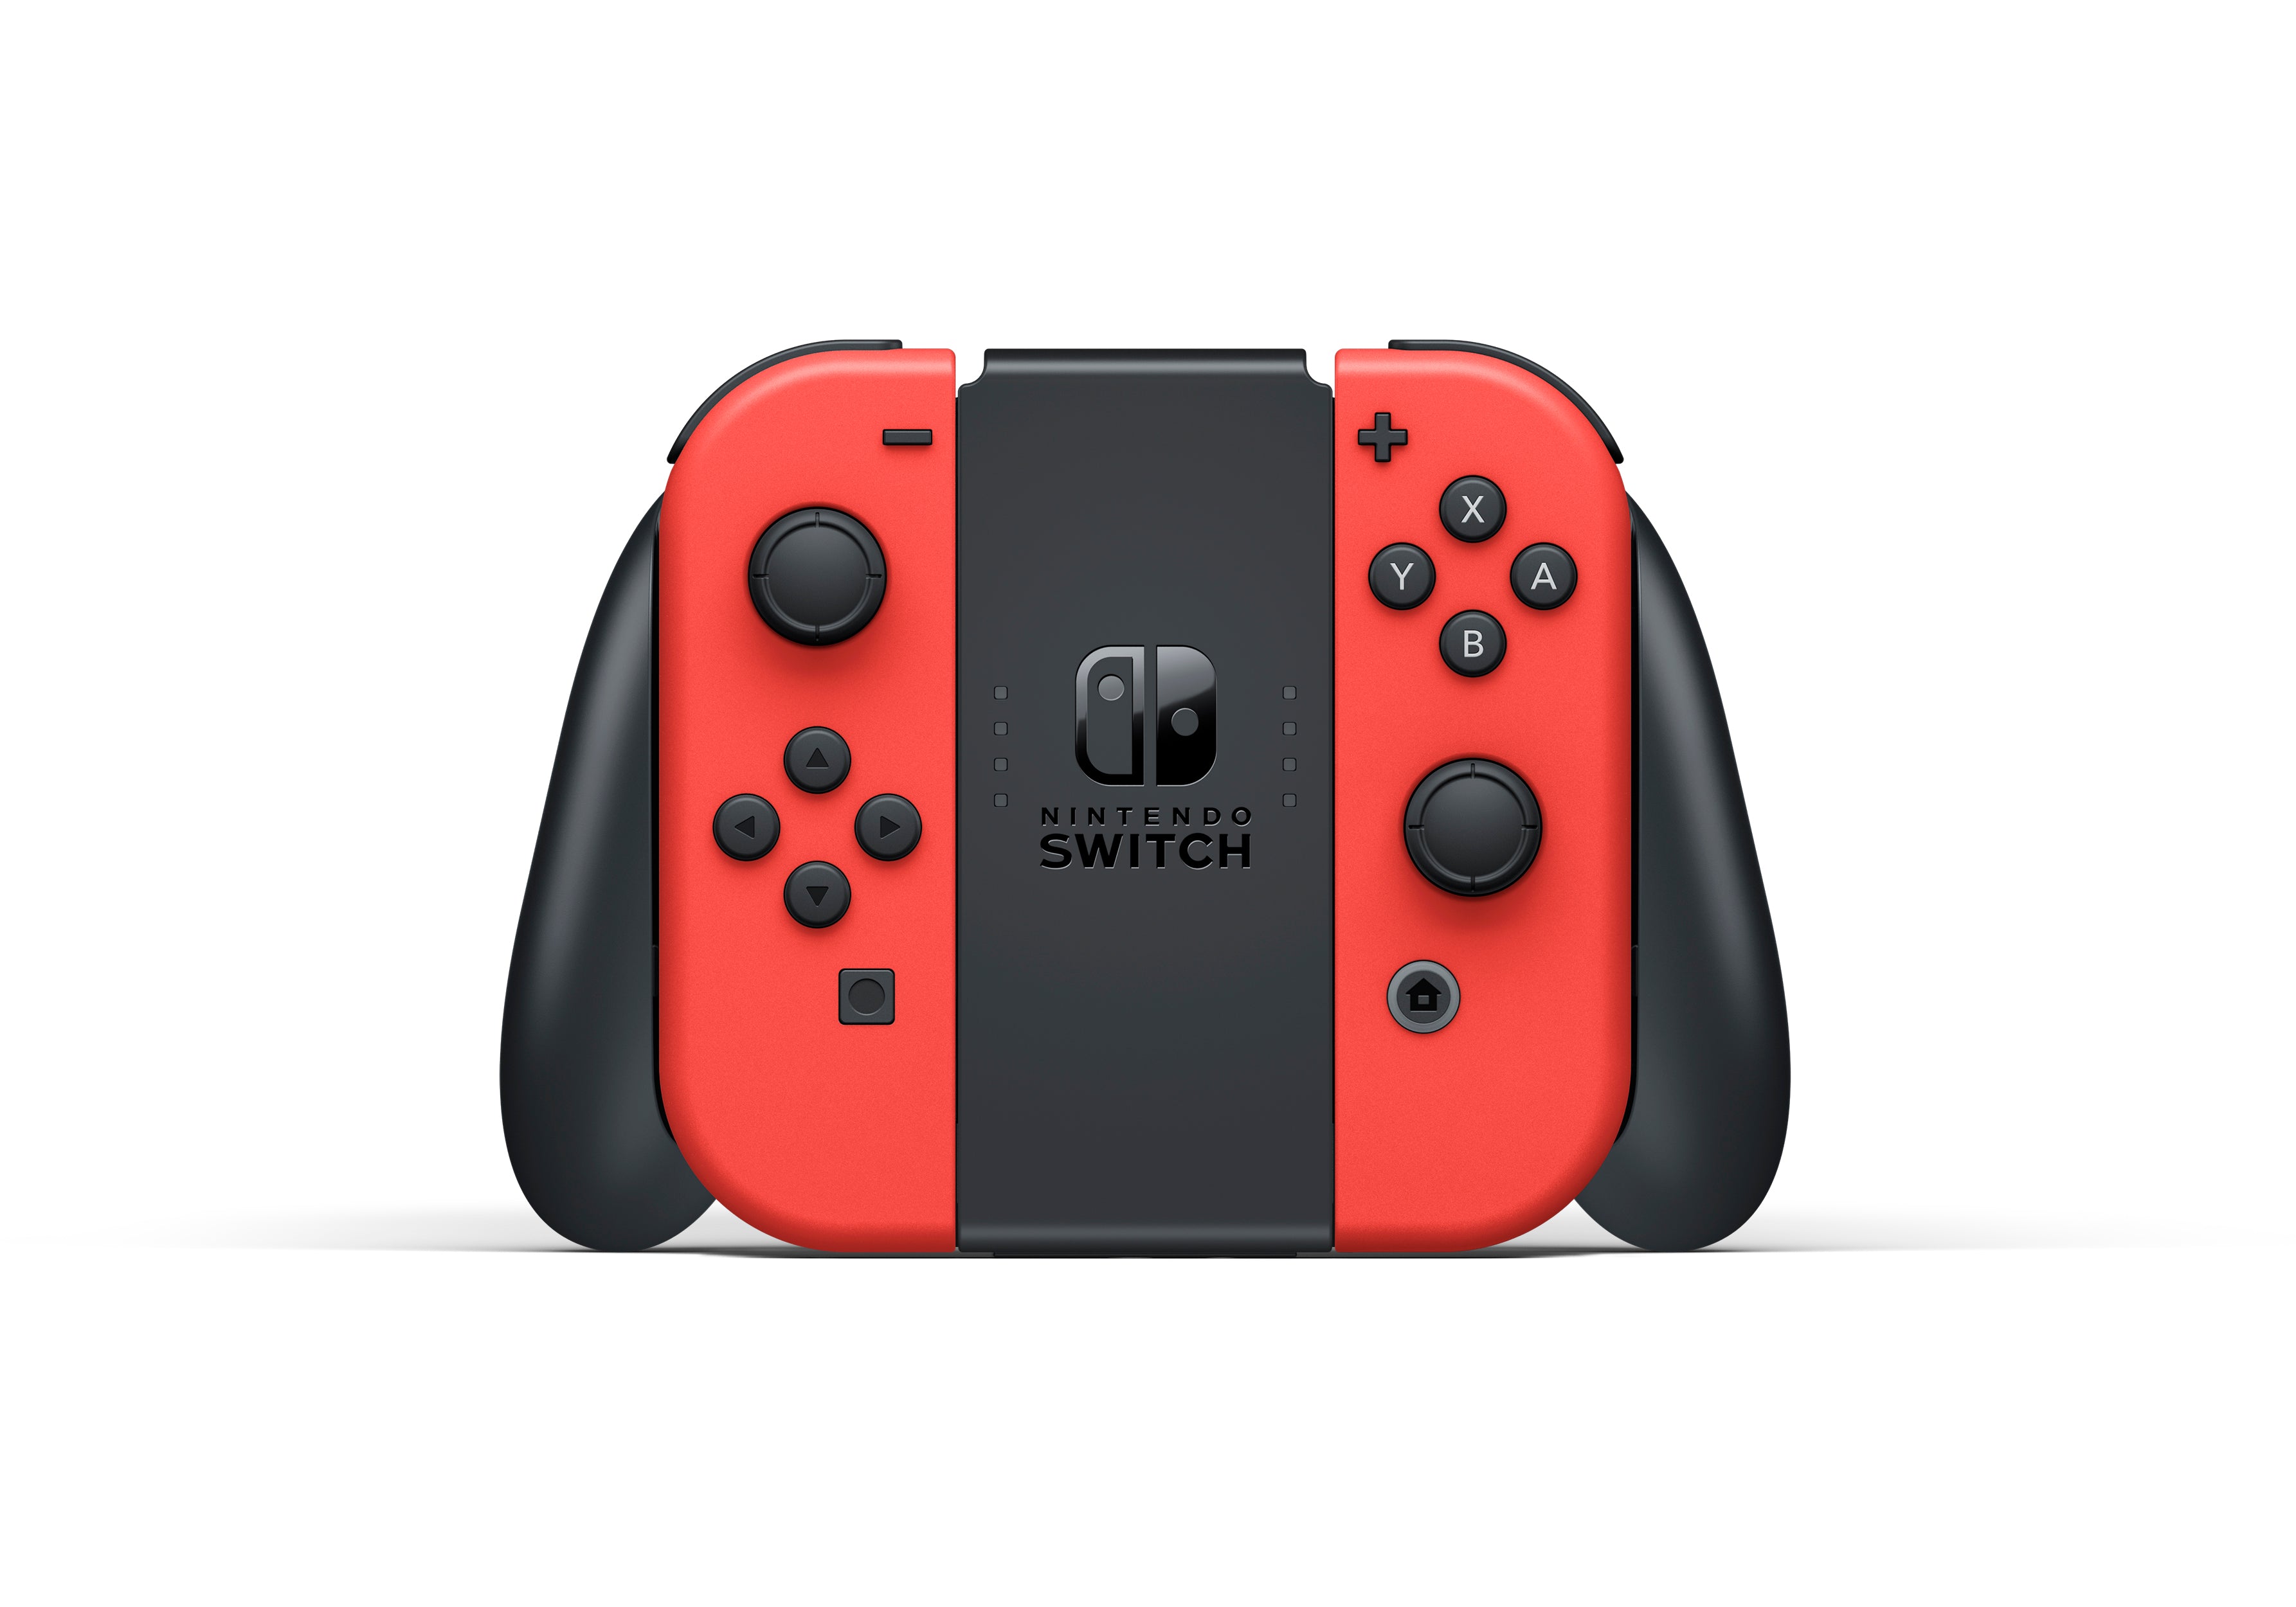 Console Nintendo Switch Oled Mario Red Edition - Albagame